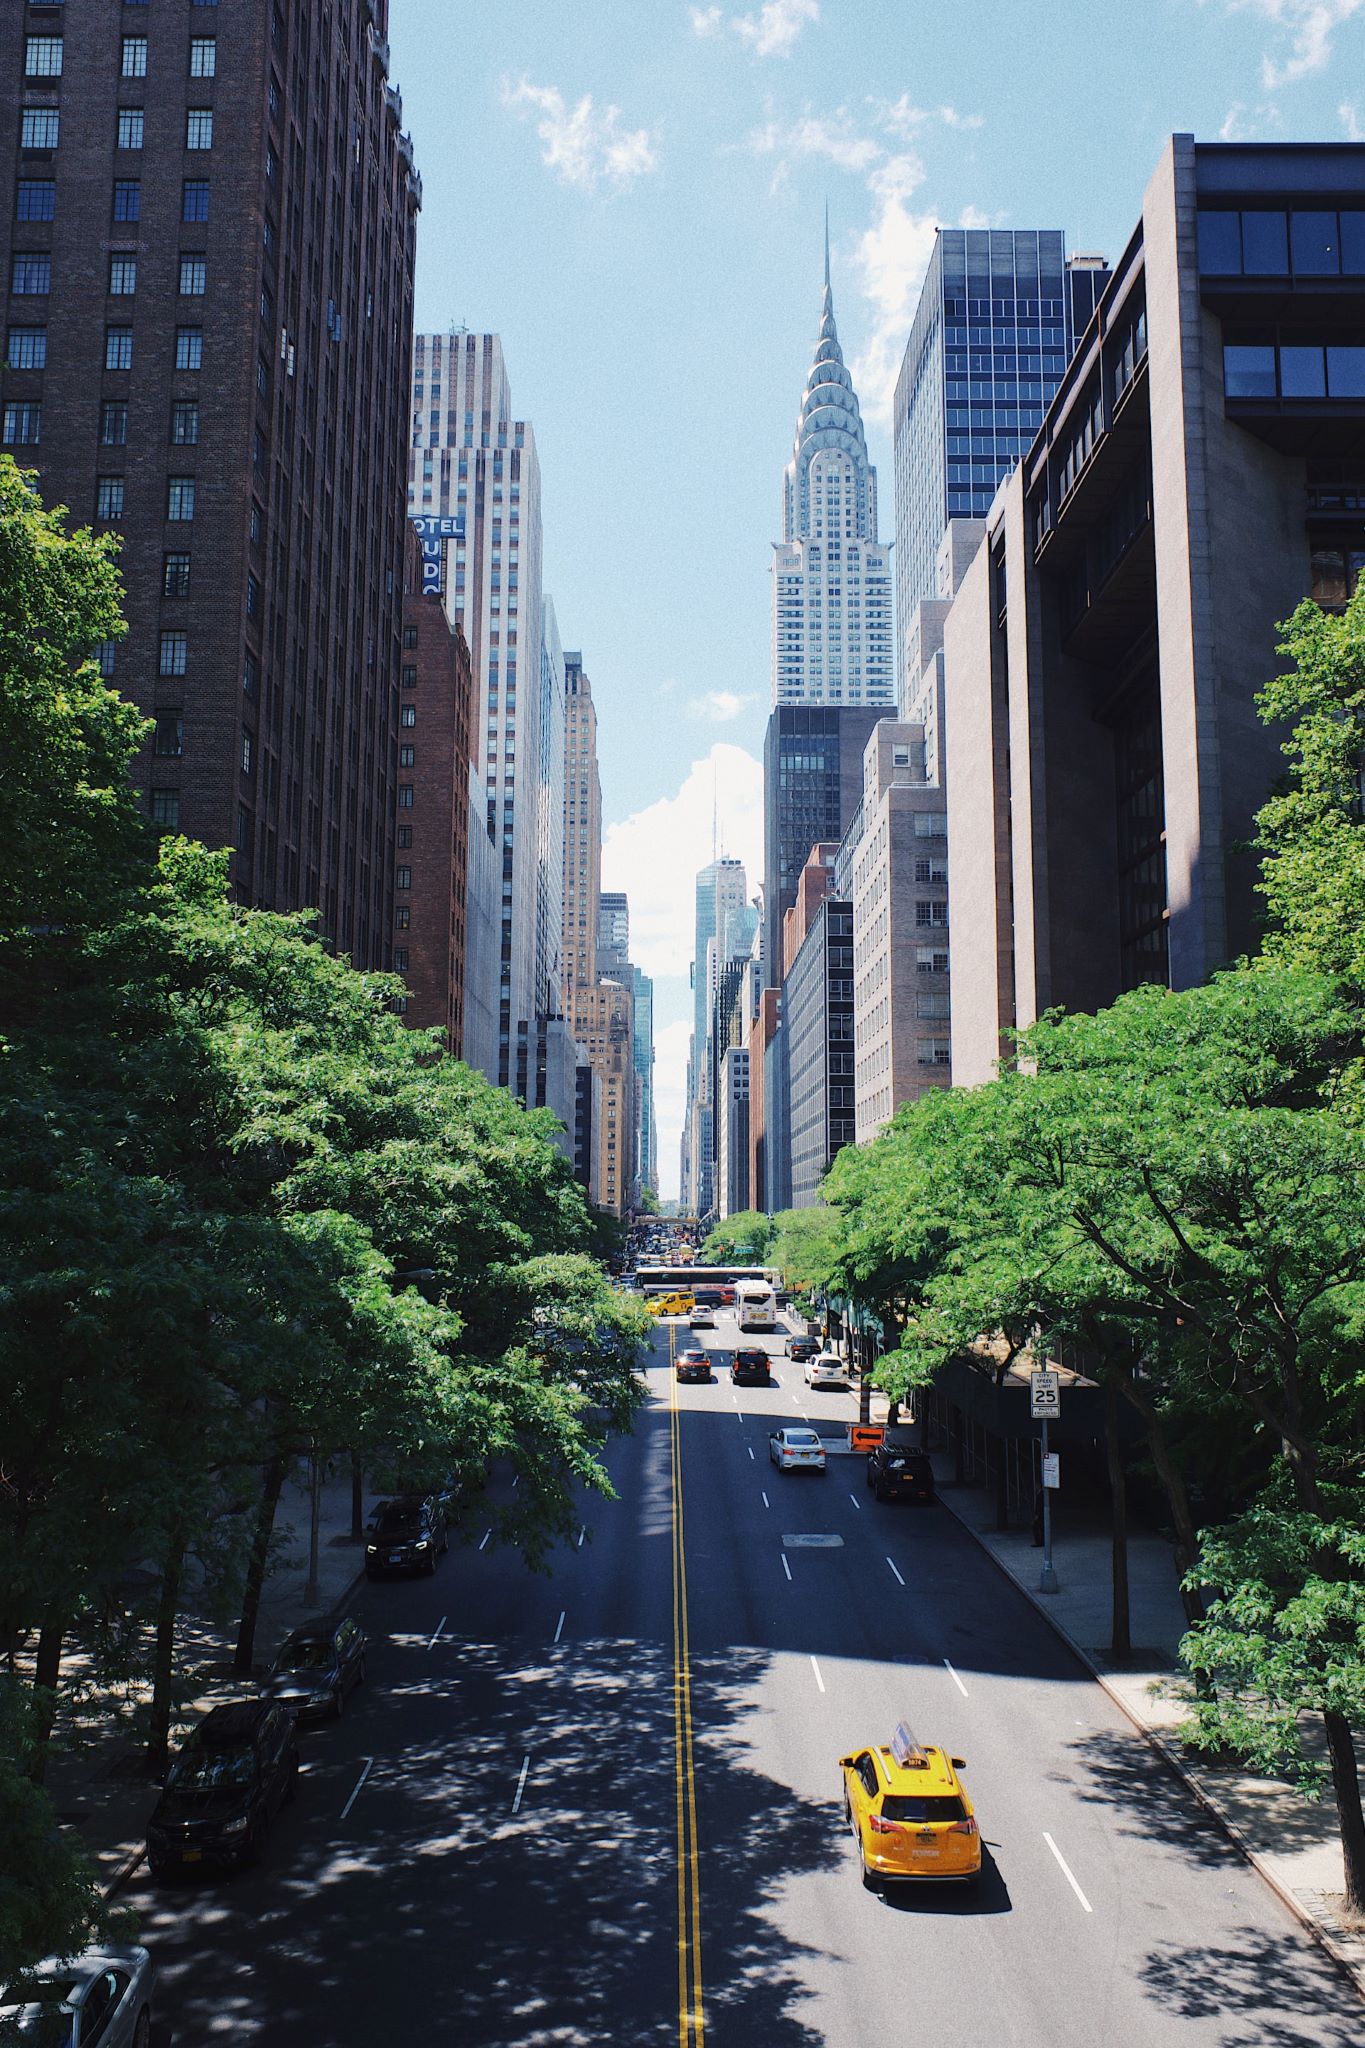 Looking down a long street in downtown New York, the Empire State building in the distance.